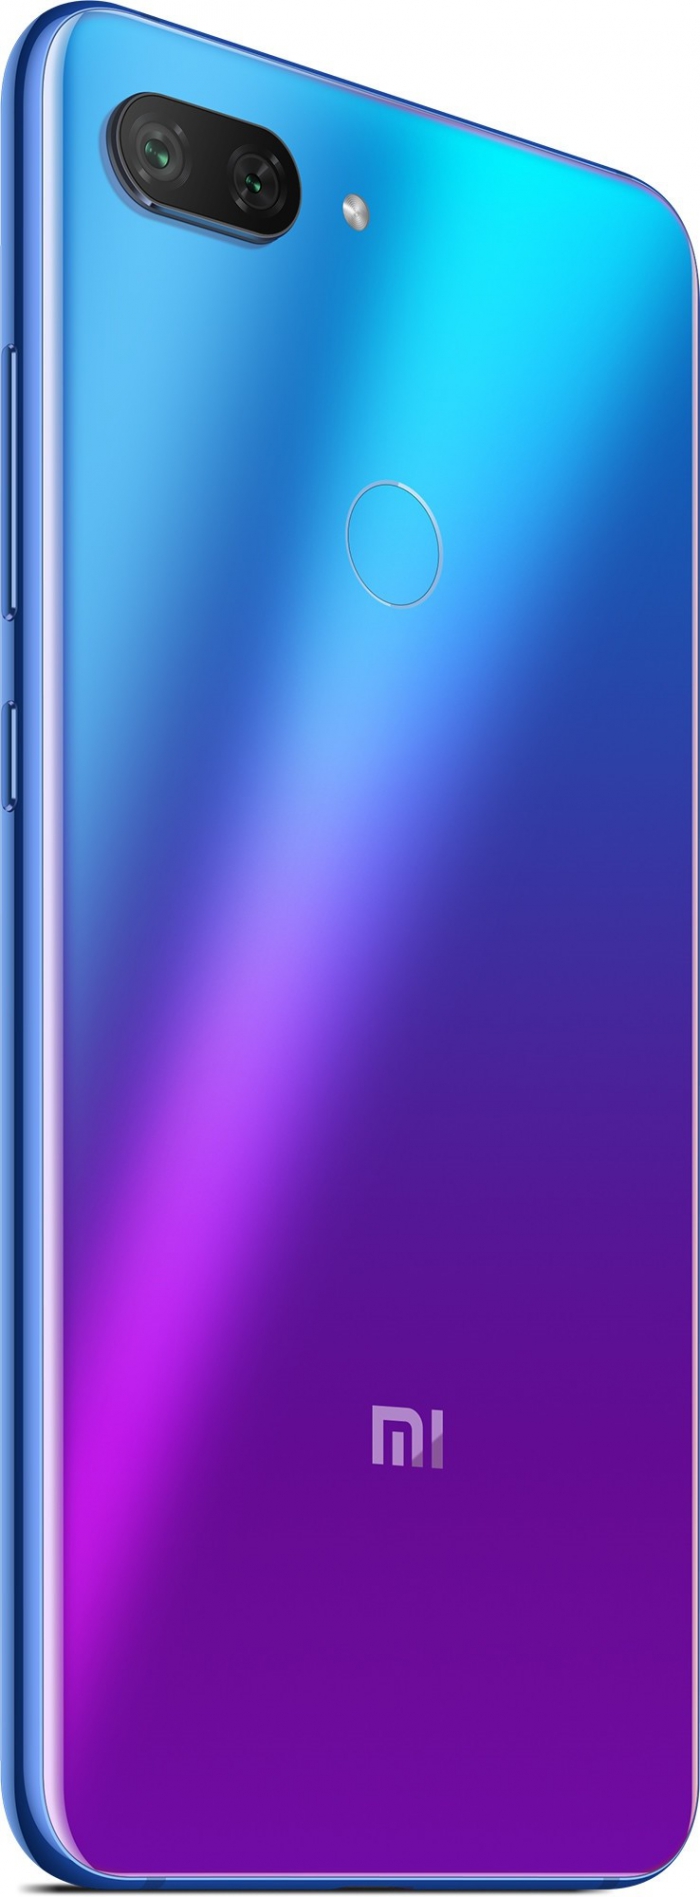 /source/pages/phonesell/xiaomi/Xiaomi_Mi_8_Lite_128gb_blue/Xiaomi_Mi_8_Lite_128gb_blue7.jpg